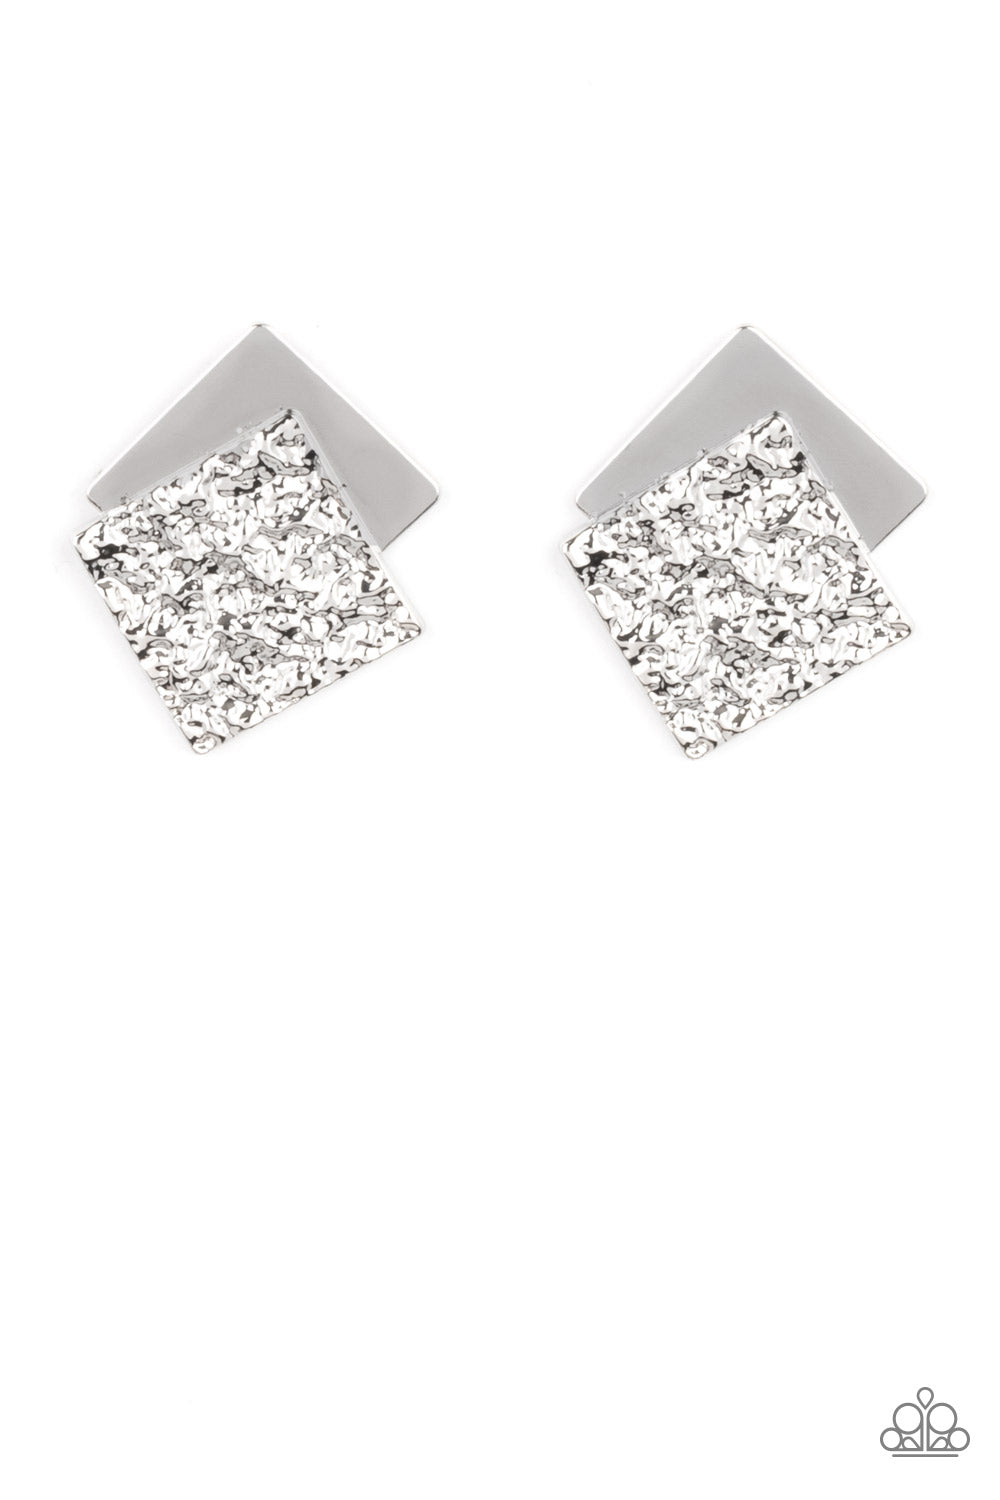 Square With Style Silver Post Earring - Paparazzi Accessories. Embossed in gritty textures, a rough silver square overlaps a plain silver square, creating a stacked frame. Earring attaches to a standard post fitting.  All Paparazzi Accessories are lead free and nickel free!  Sold as one pair of post earrings.